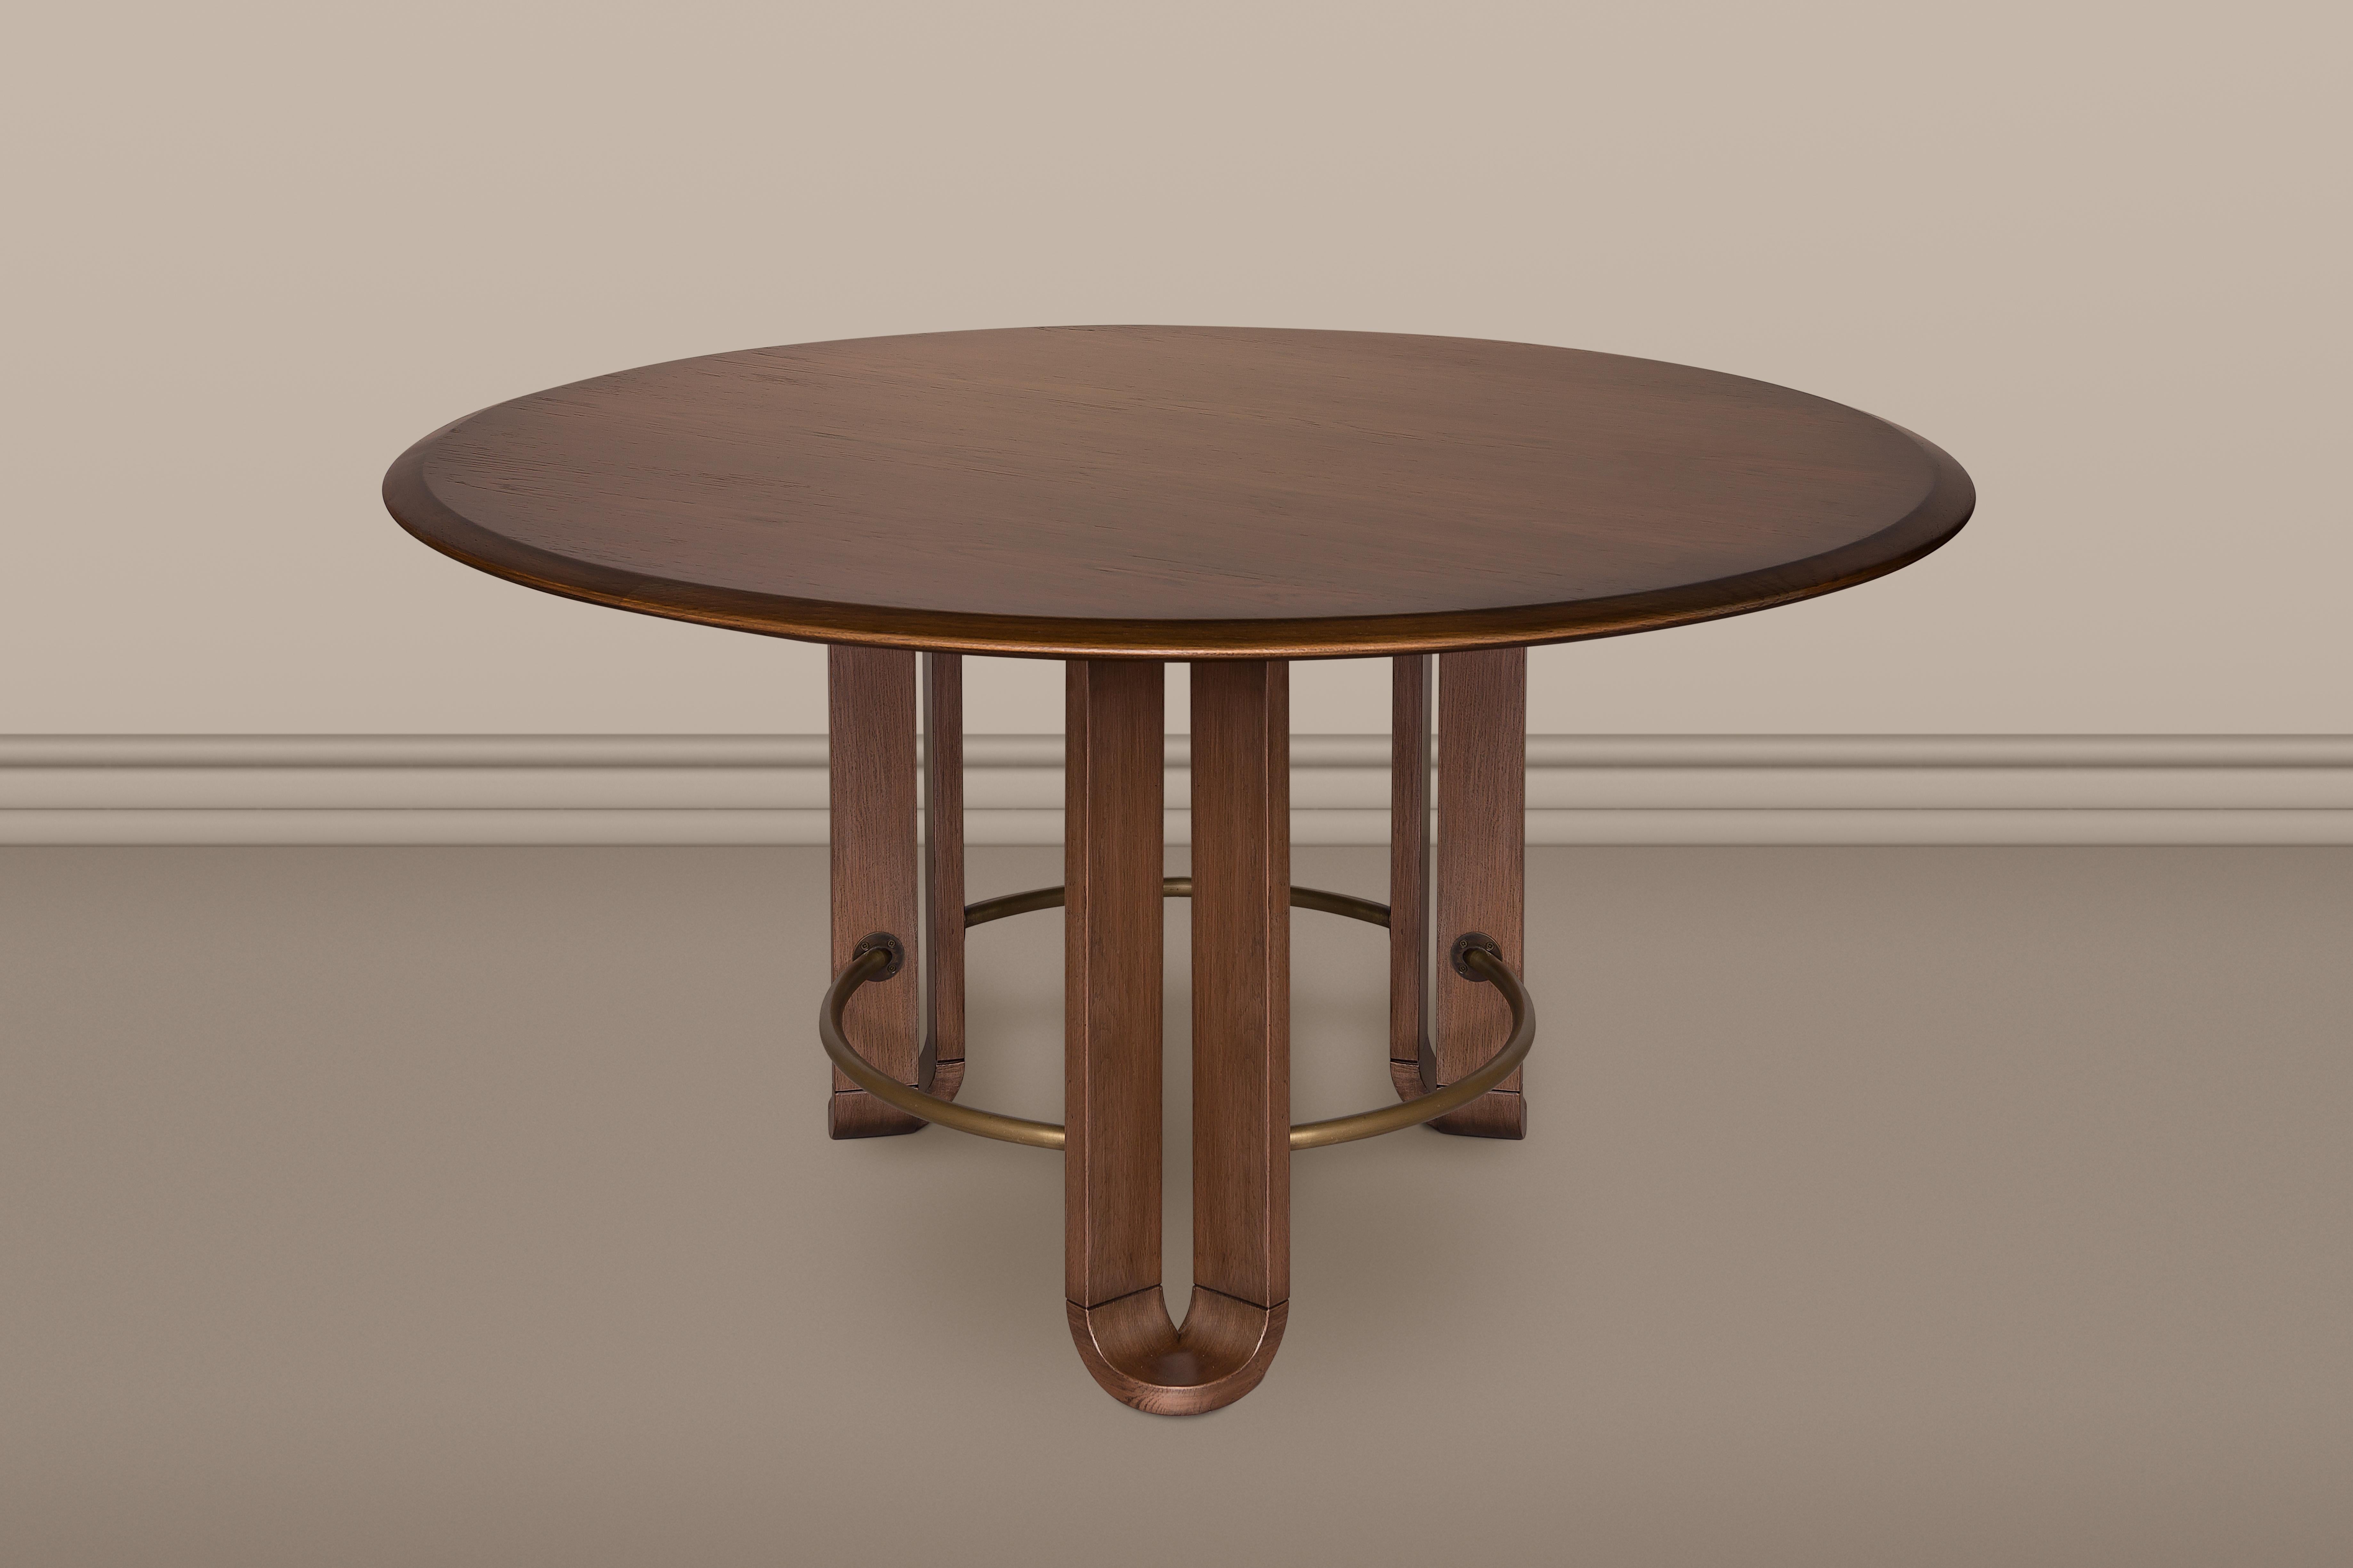 Unique round yaprak dining table by Ekin Varon
Dimensions: D 140 x 75 H.
Materials: walnut, maple, oak.
Custom materials, sizing and finishes available as item is made to order.

Ekin Varon is the founder and creative director of Ekin Varon